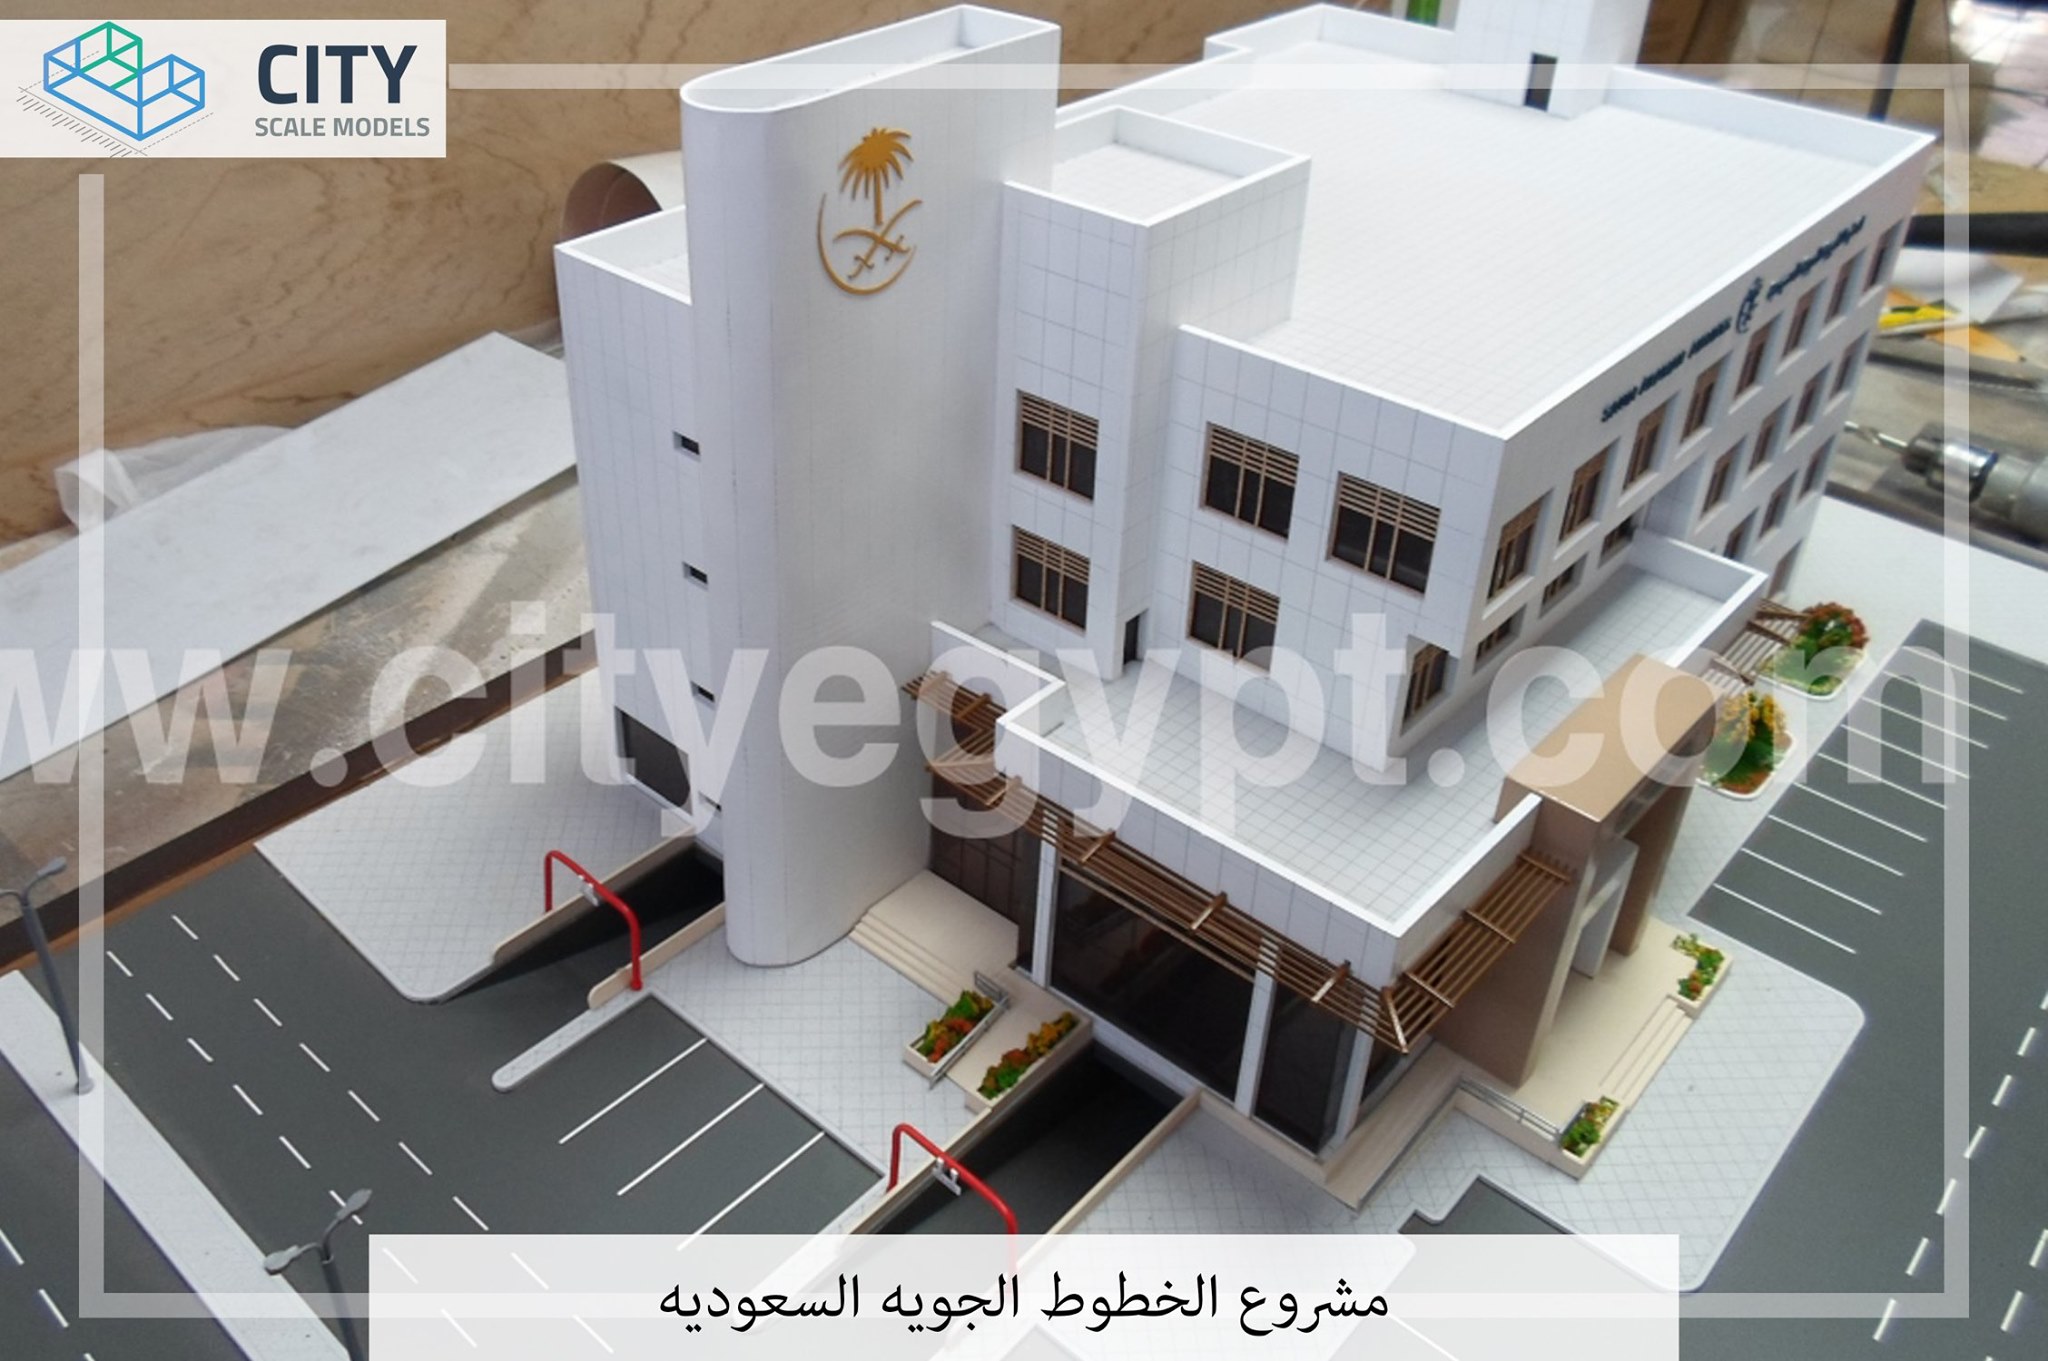 A model of the Saudi Airlines building